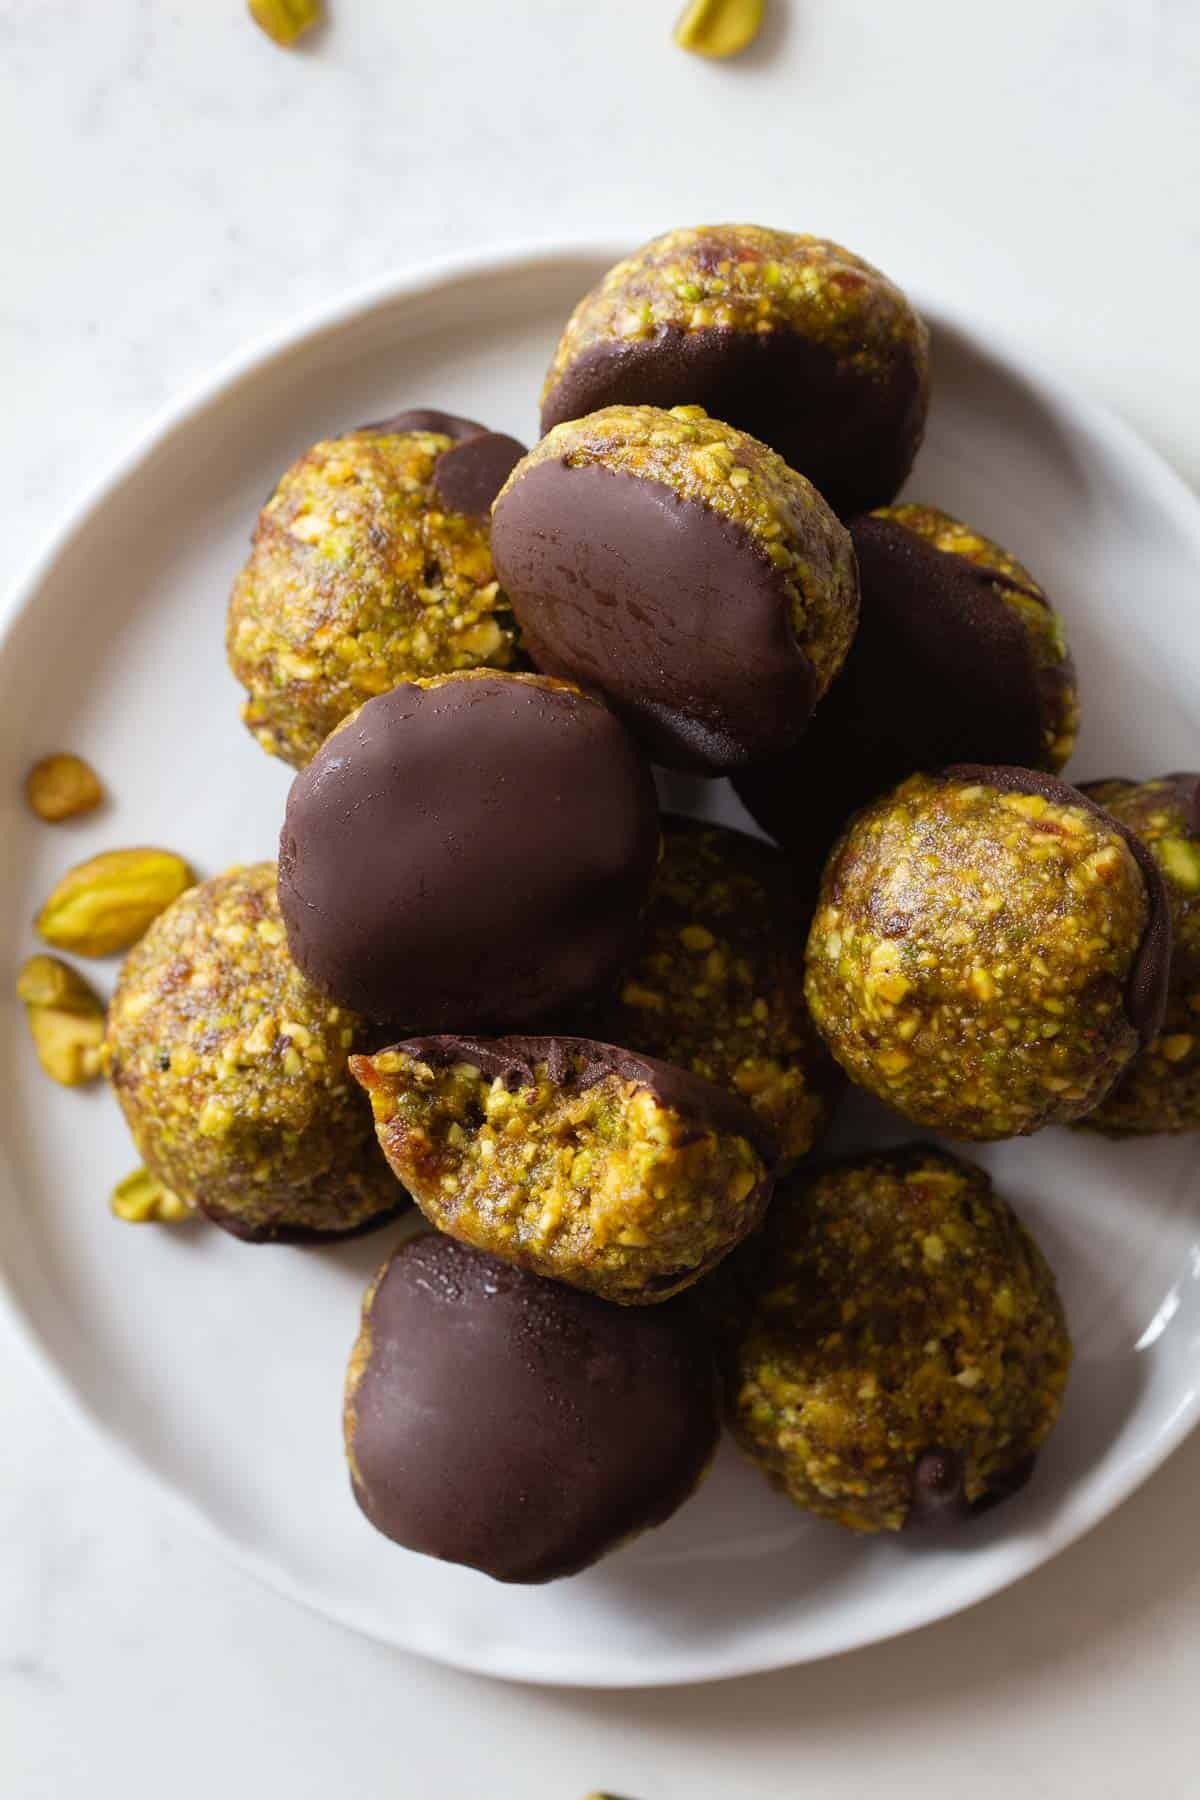 Pistachio Cookies dipped in chocolate piled on a small plate.